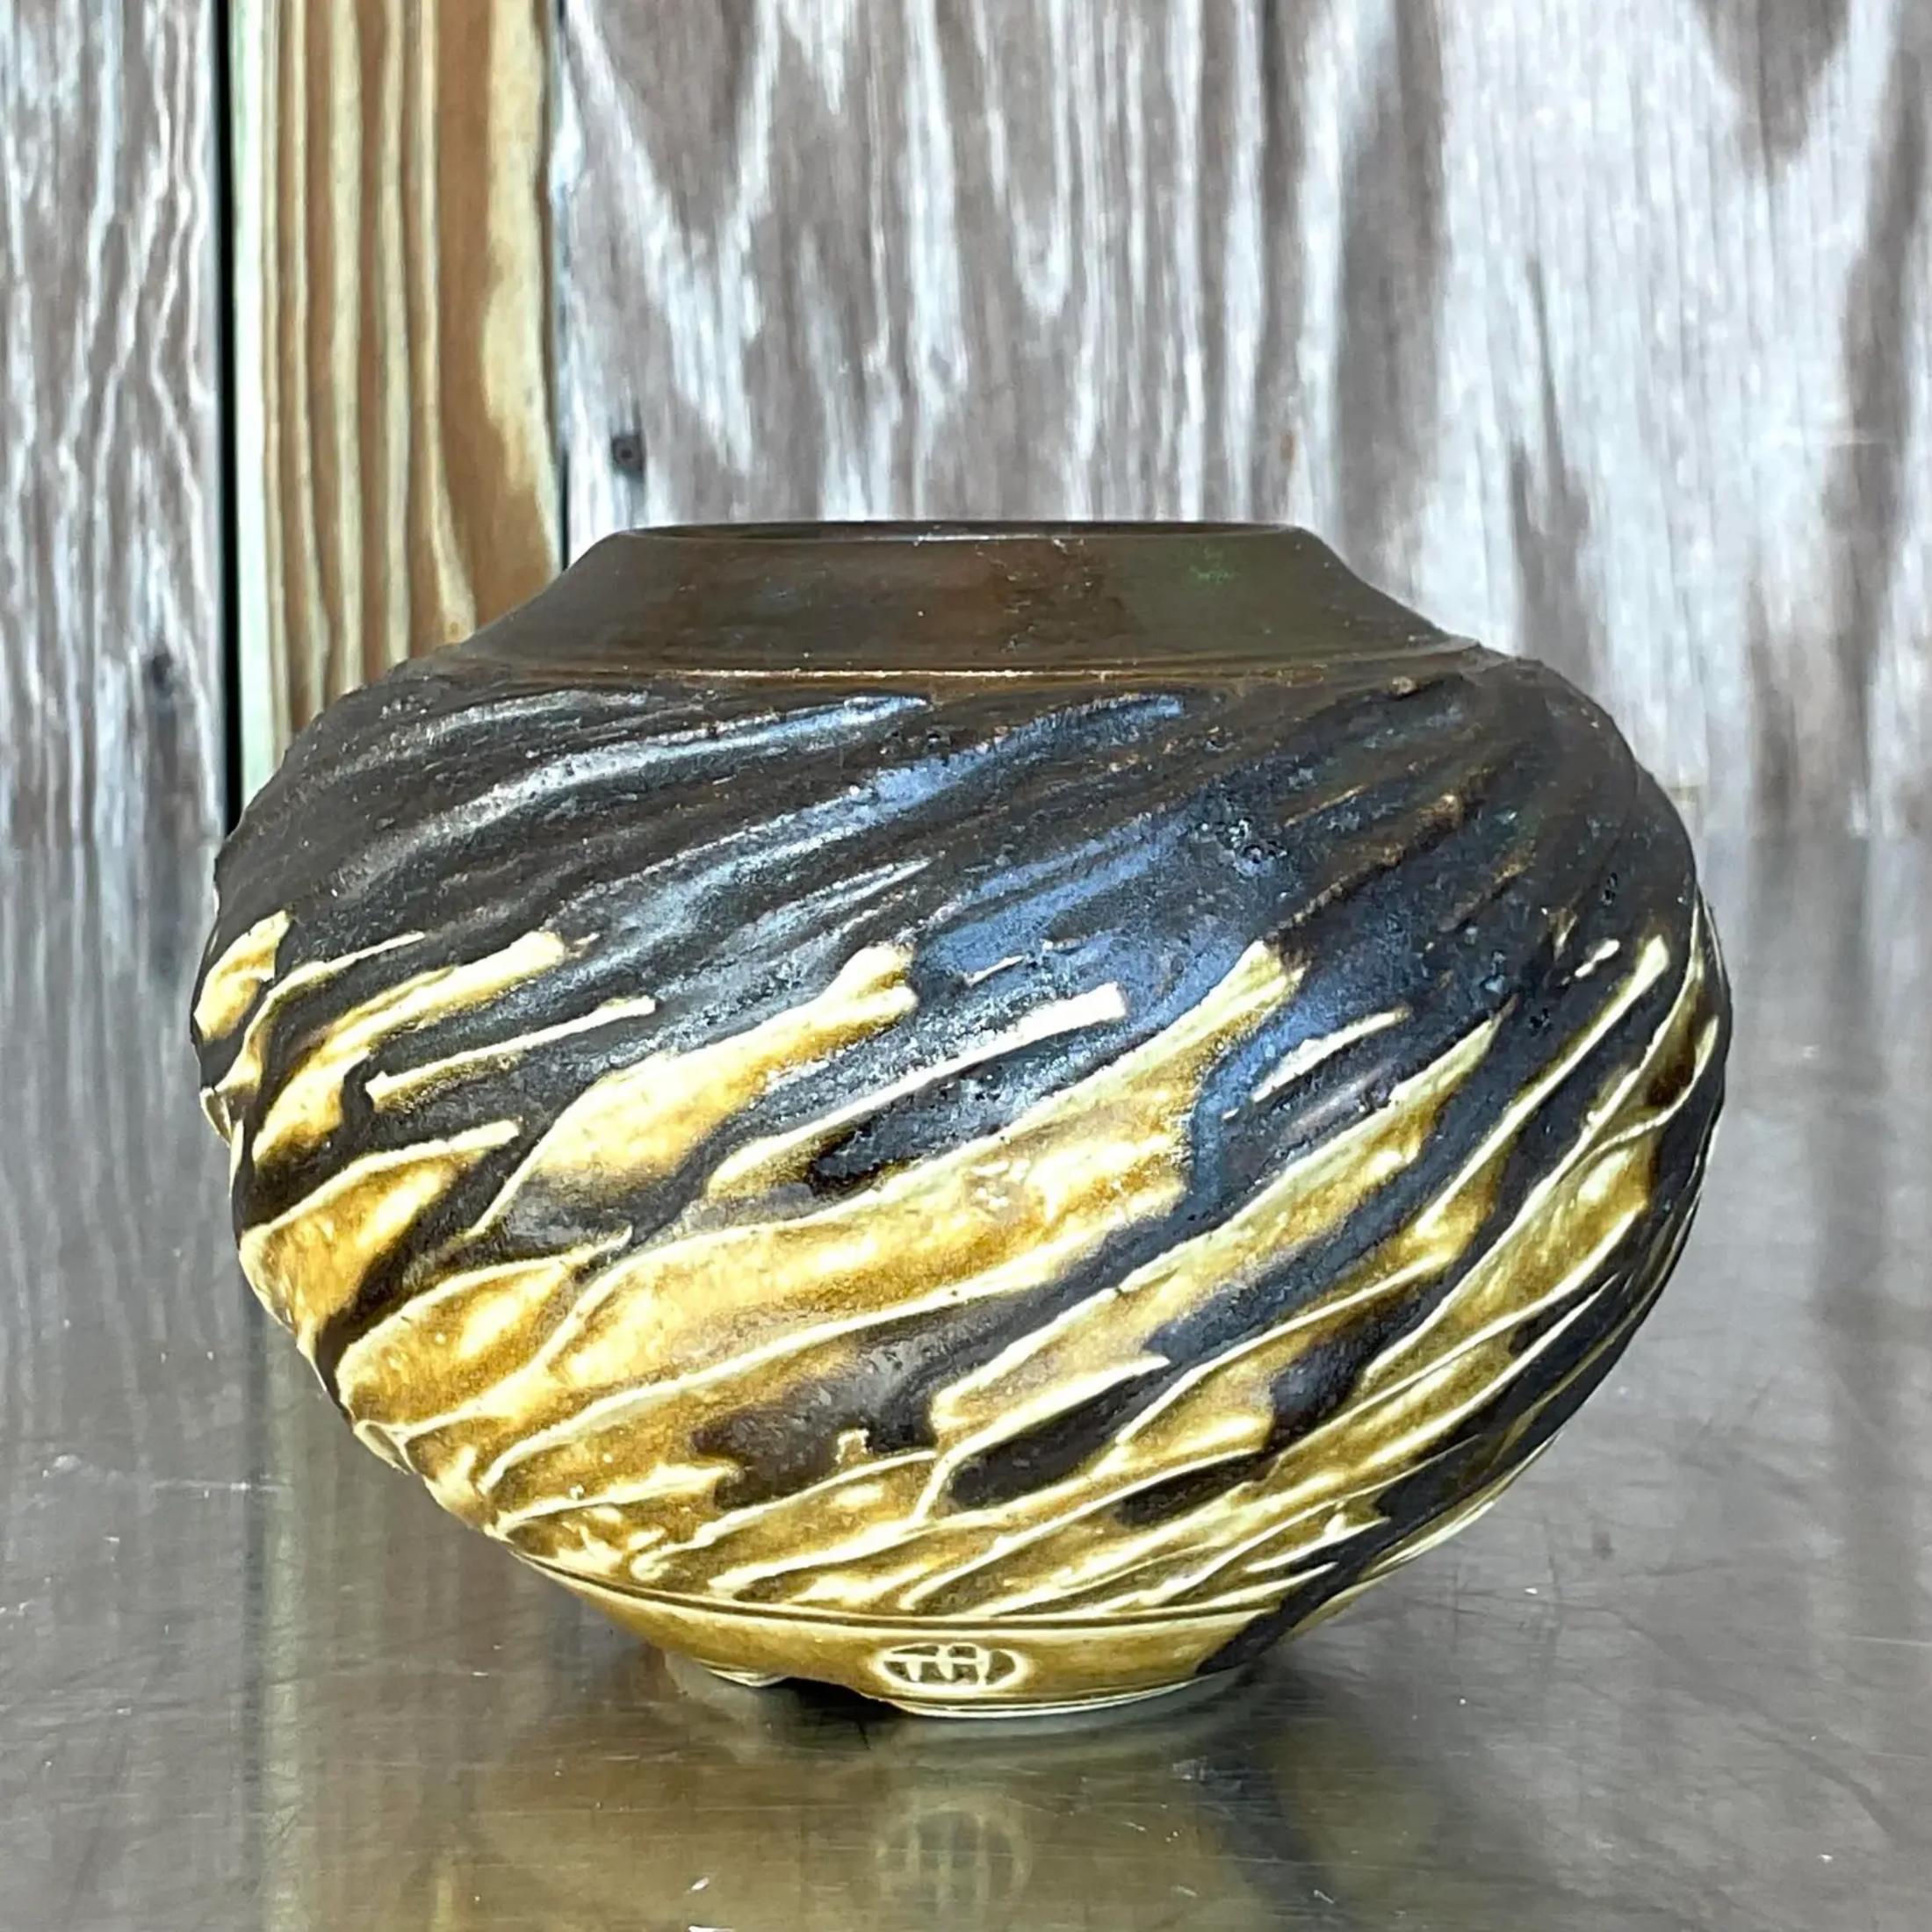 An amazing vintage Boho studio pottery vase. A chic textured piece with beautiful hand painted detail. Signed on the bottom. Acquired from a Palm Beach estate